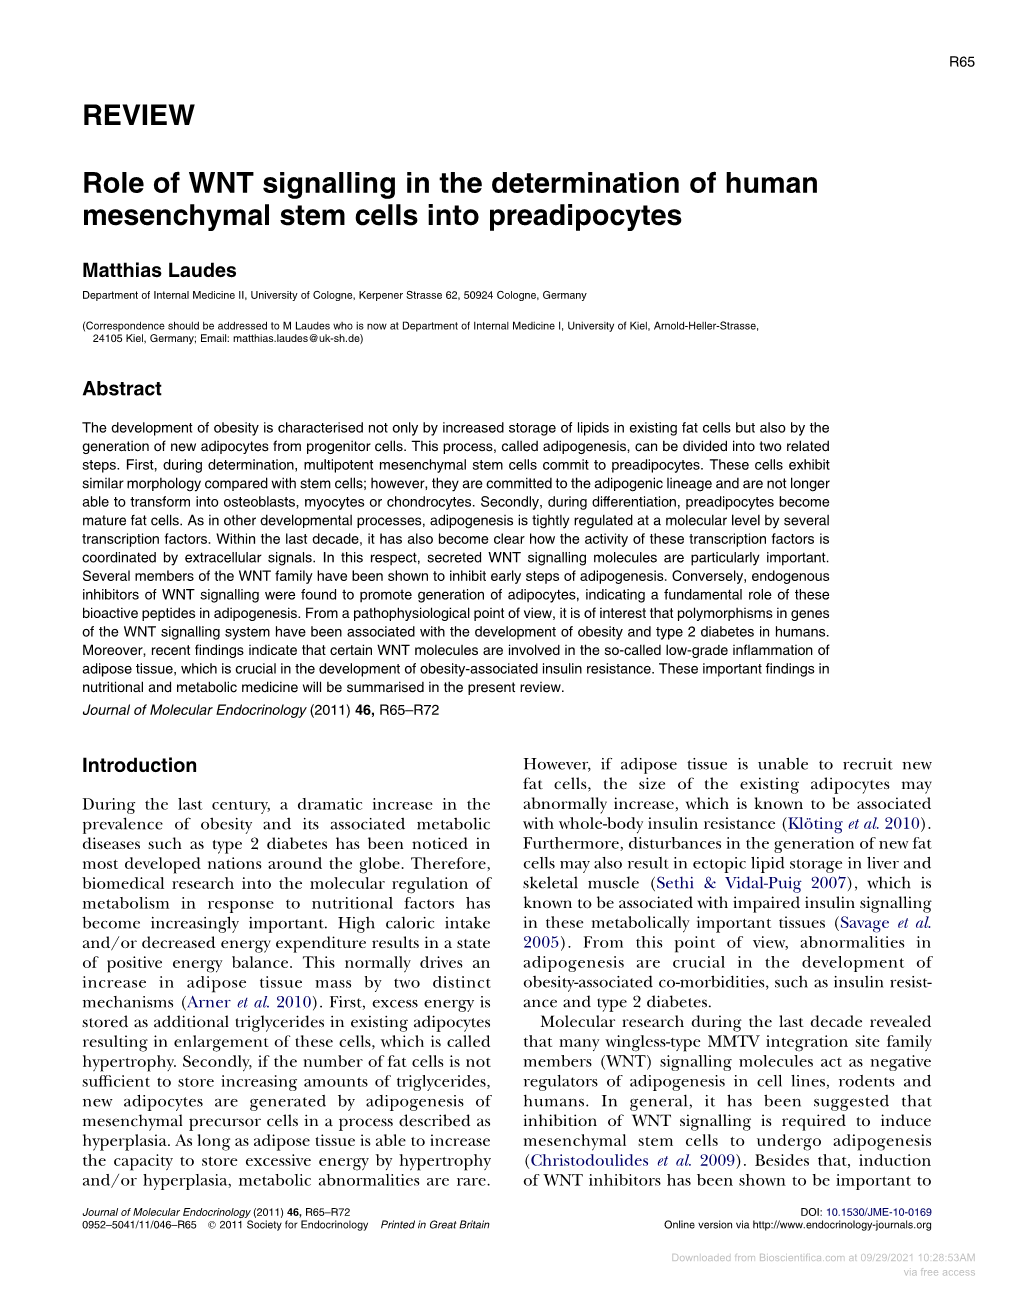 REVIEW Role of WNT Signalling in the Determination of Human